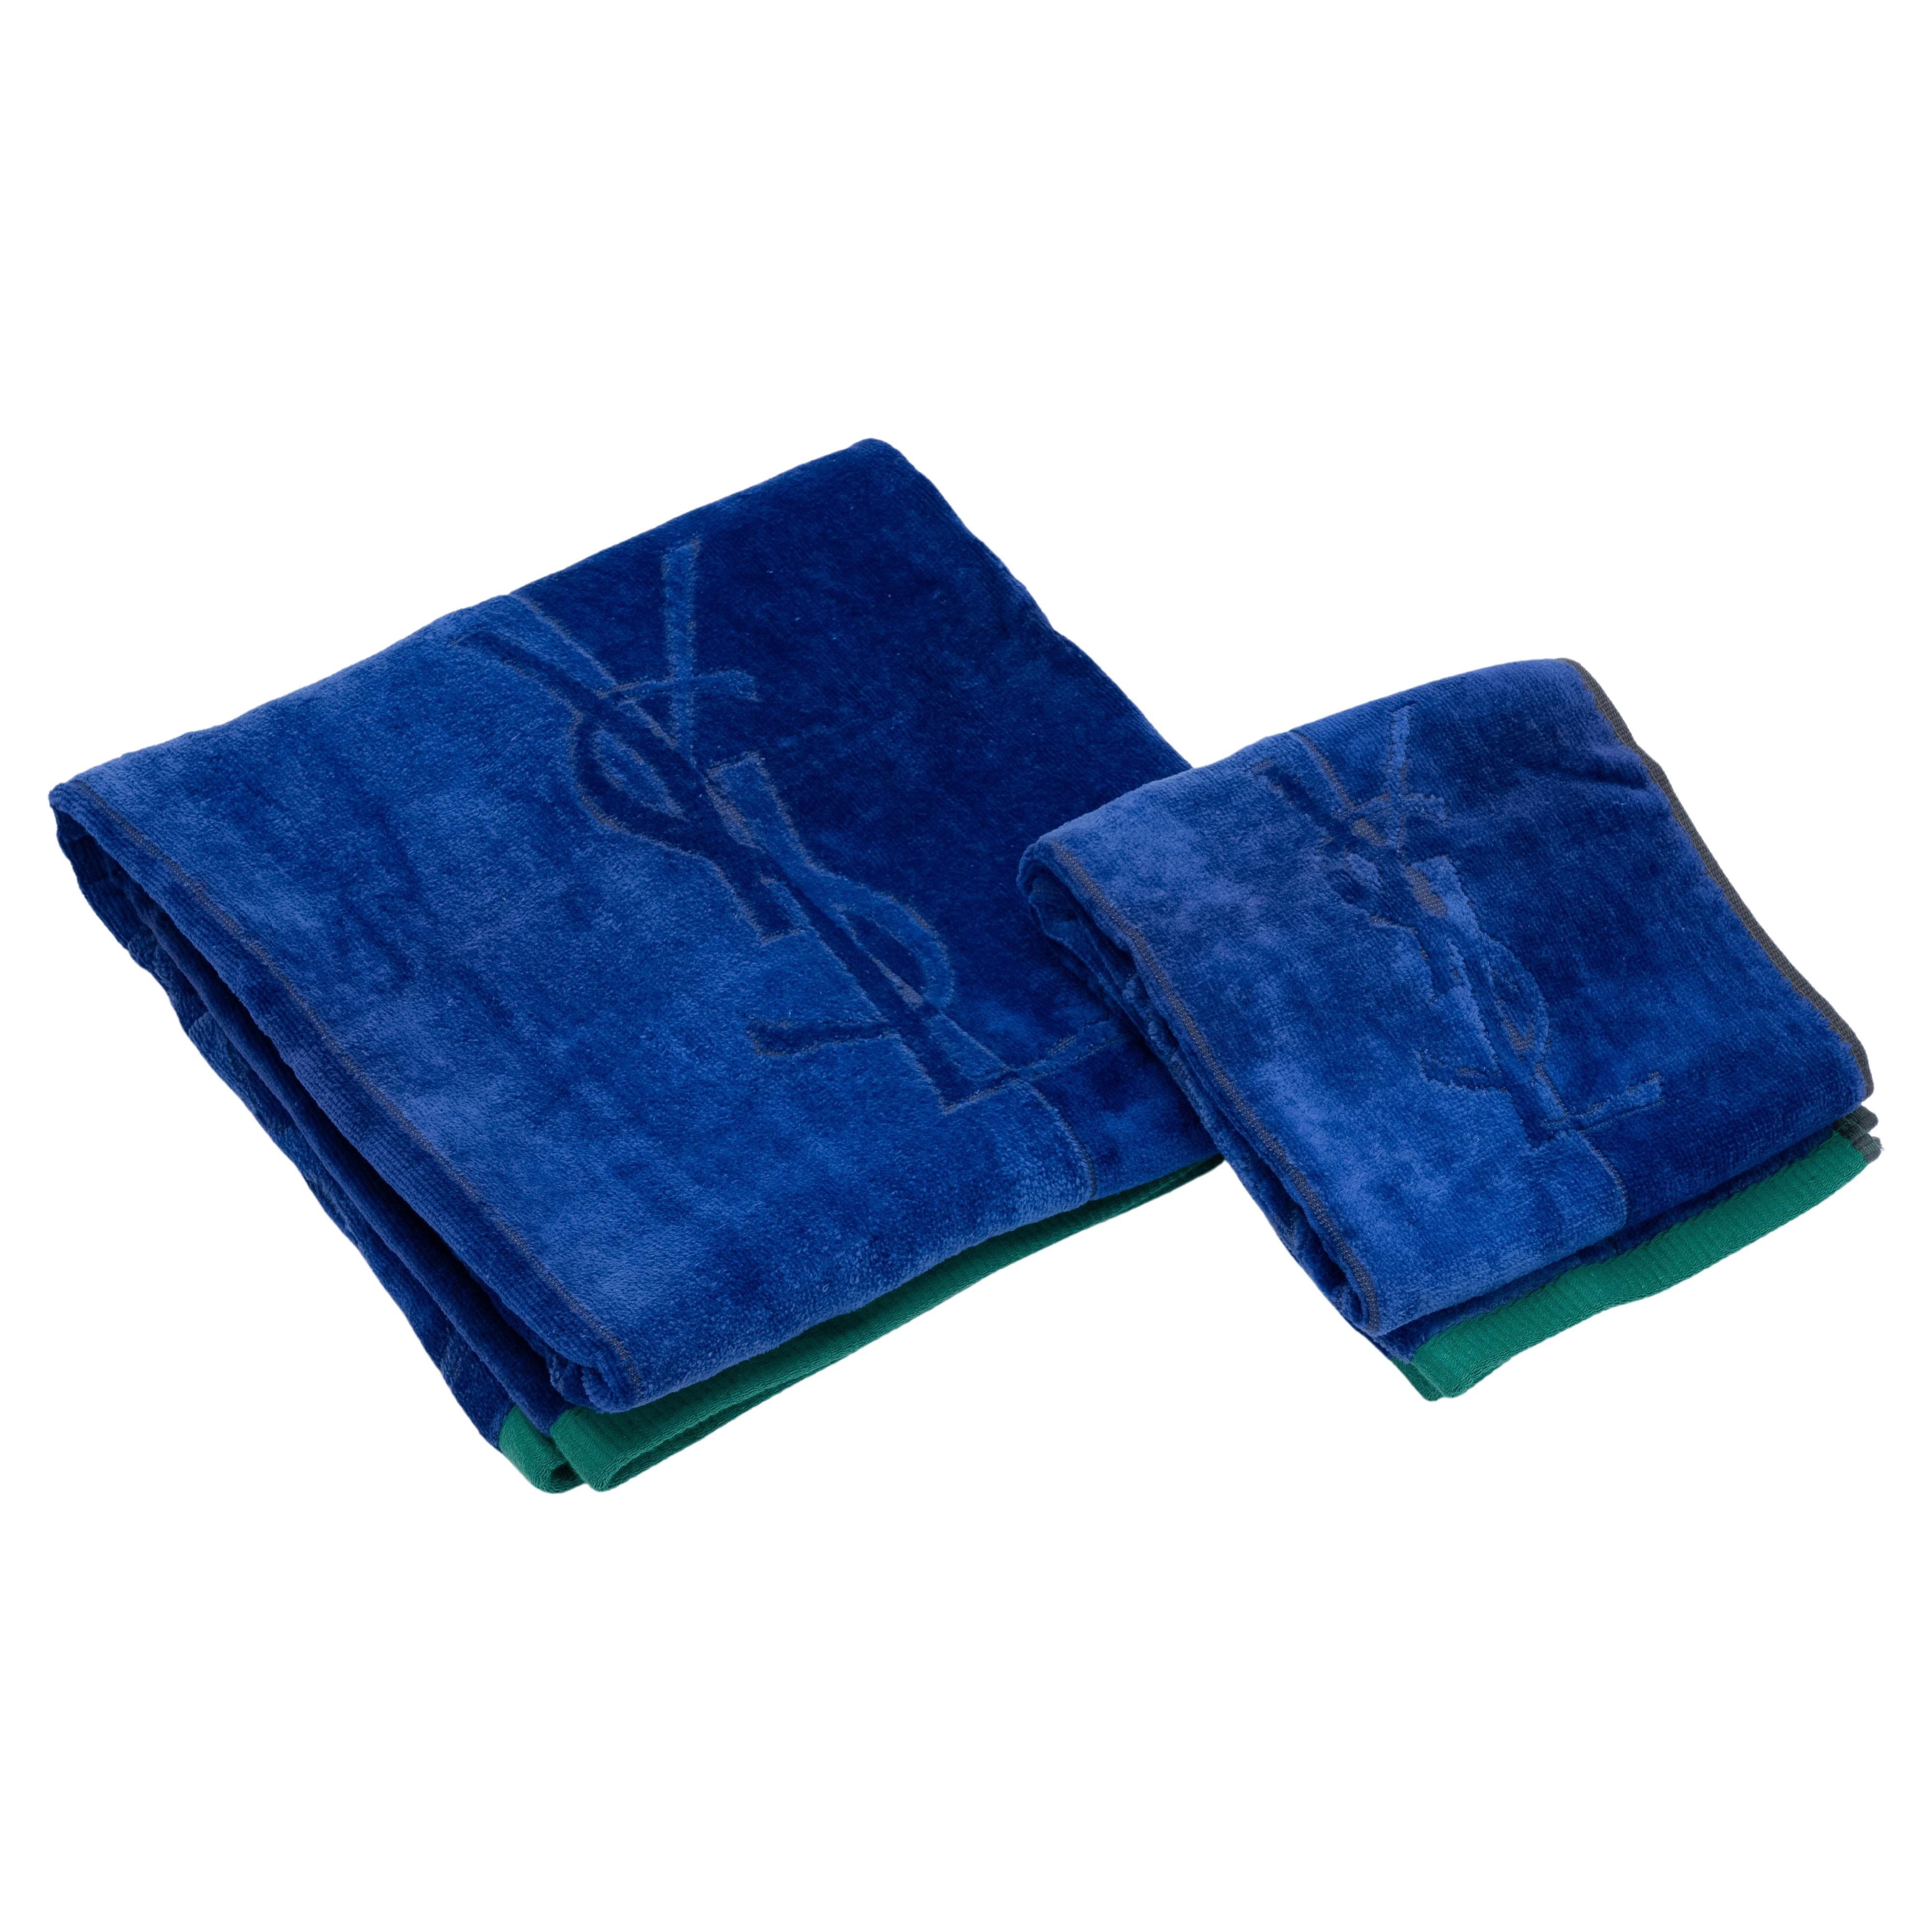 YSL New Set of 2 Blue Cotton Towels